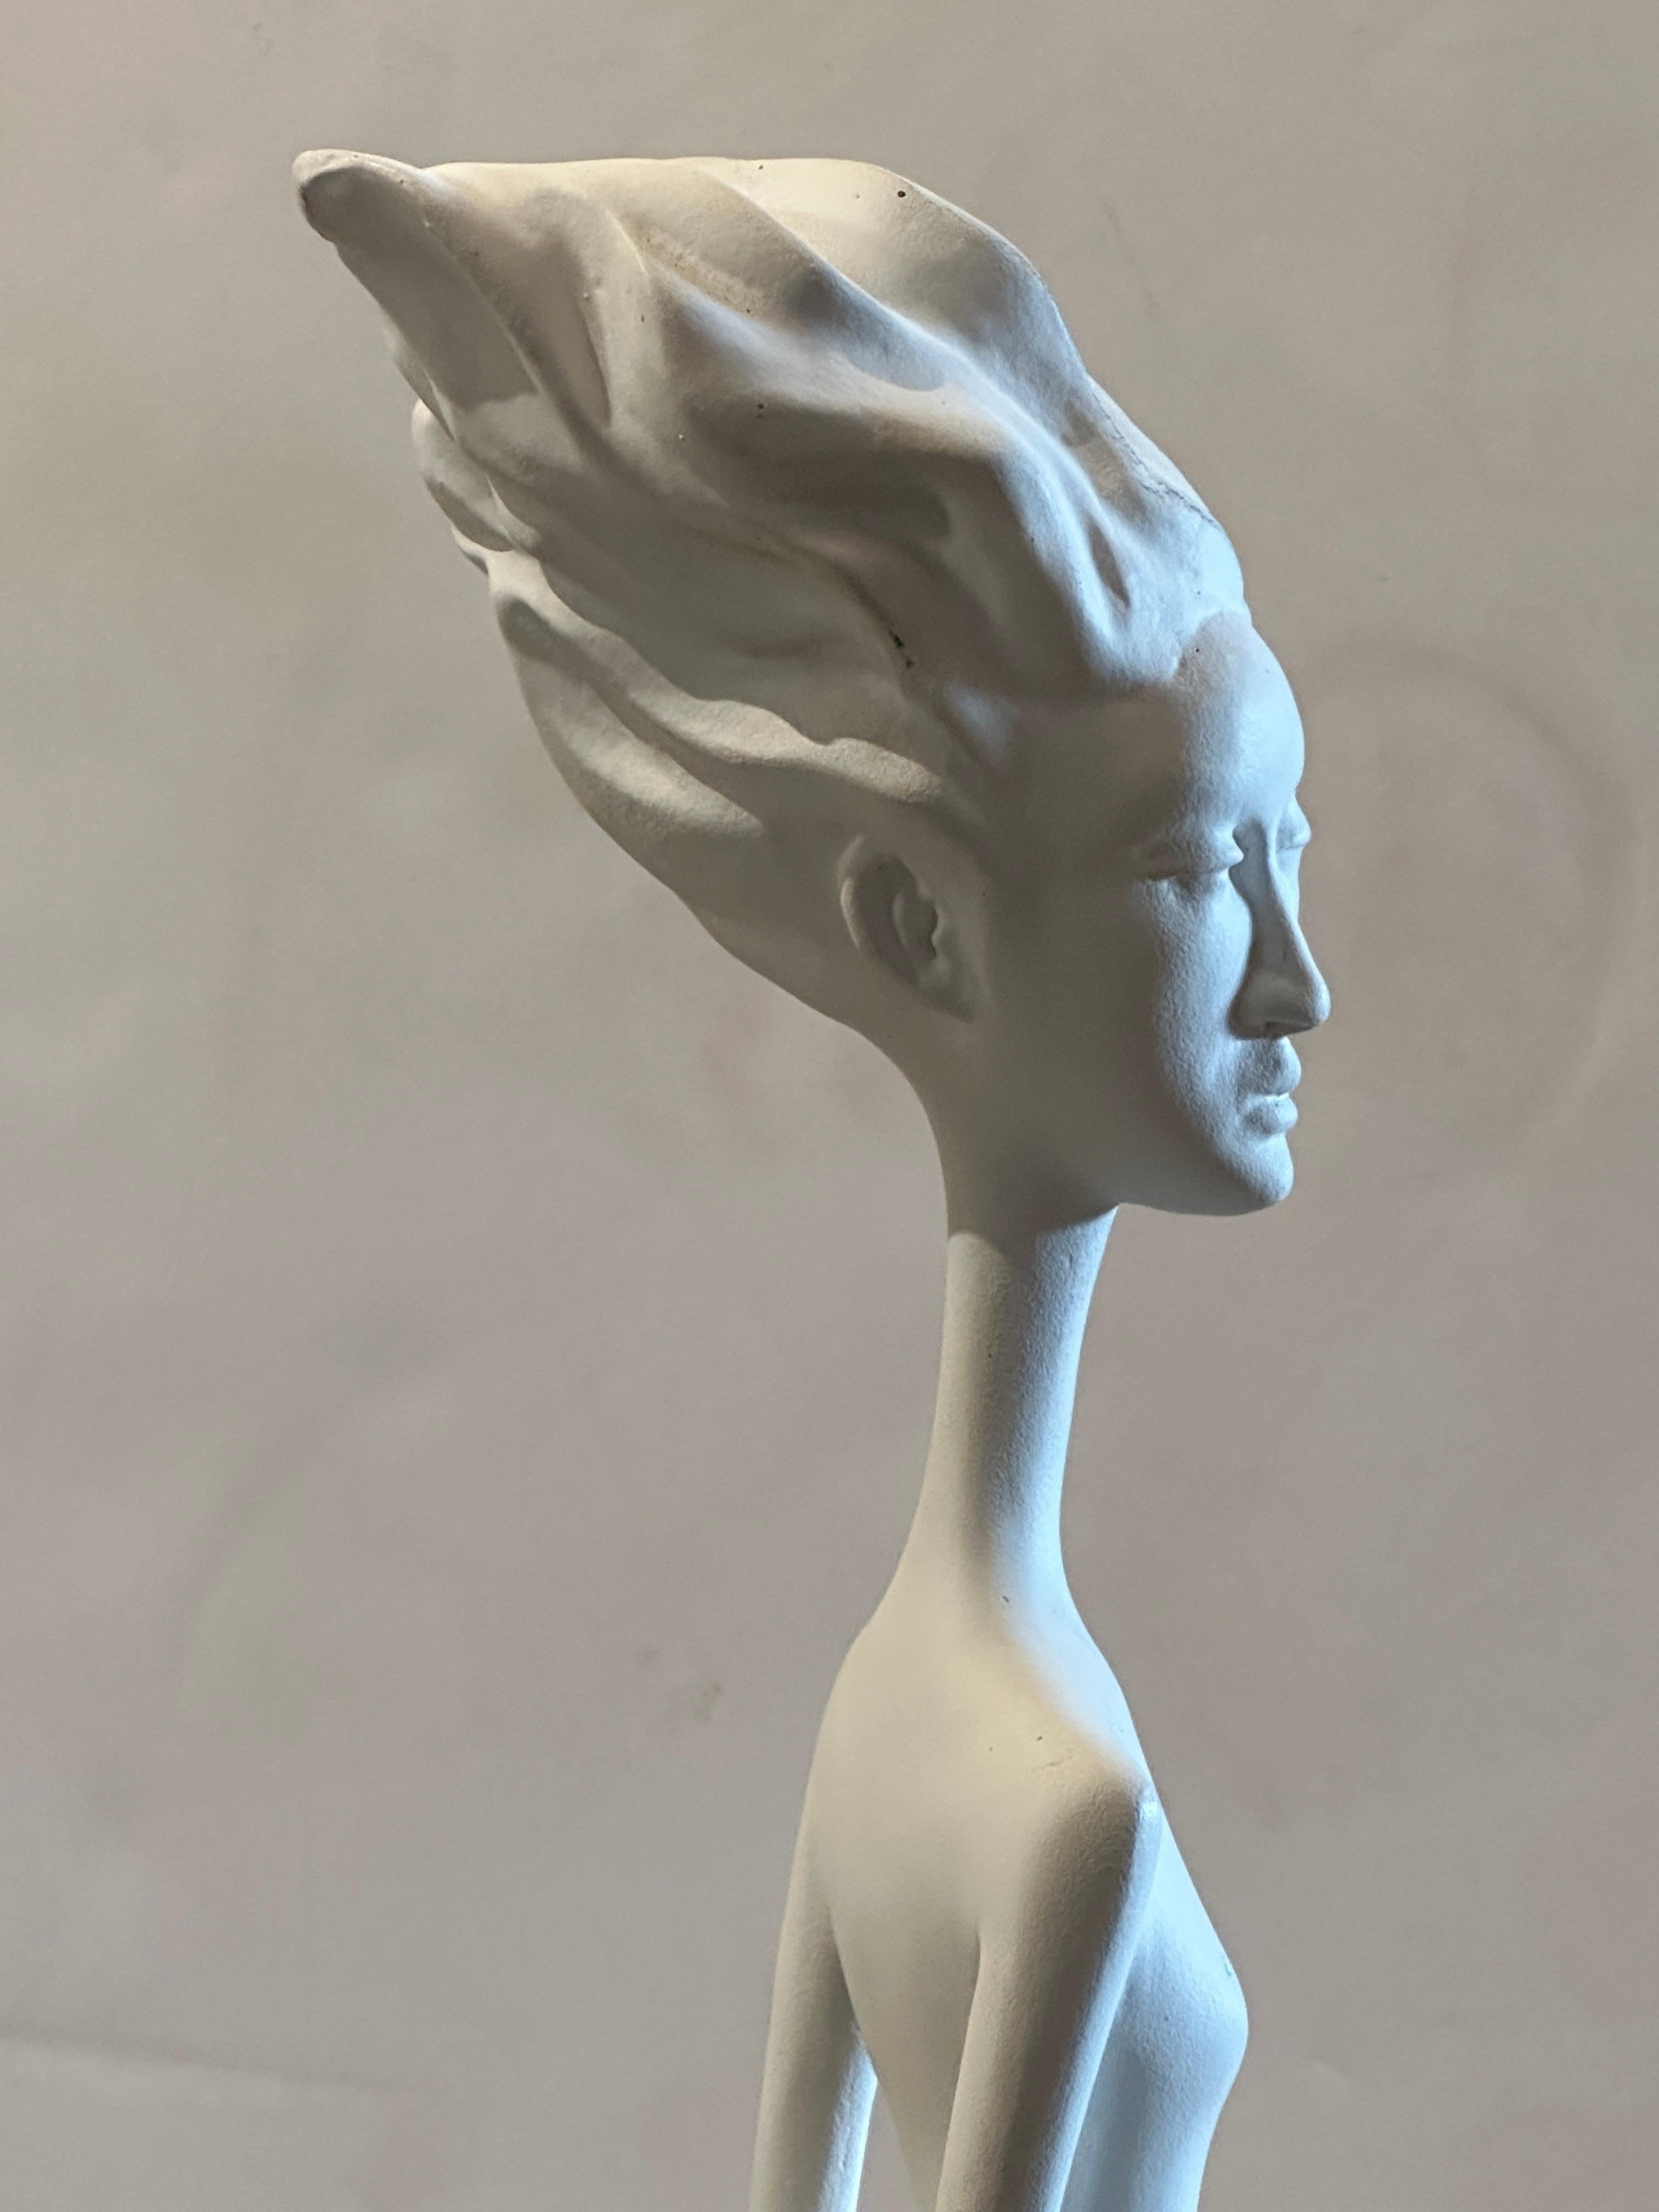 This captivating folk art sculpture crafted in white plaster creatively explores the mysterious Arcturian aliens' world. The figure of the alien girl, with her elongated skull, extended neck, slim jaw, and filiform body, and the subtle tension in